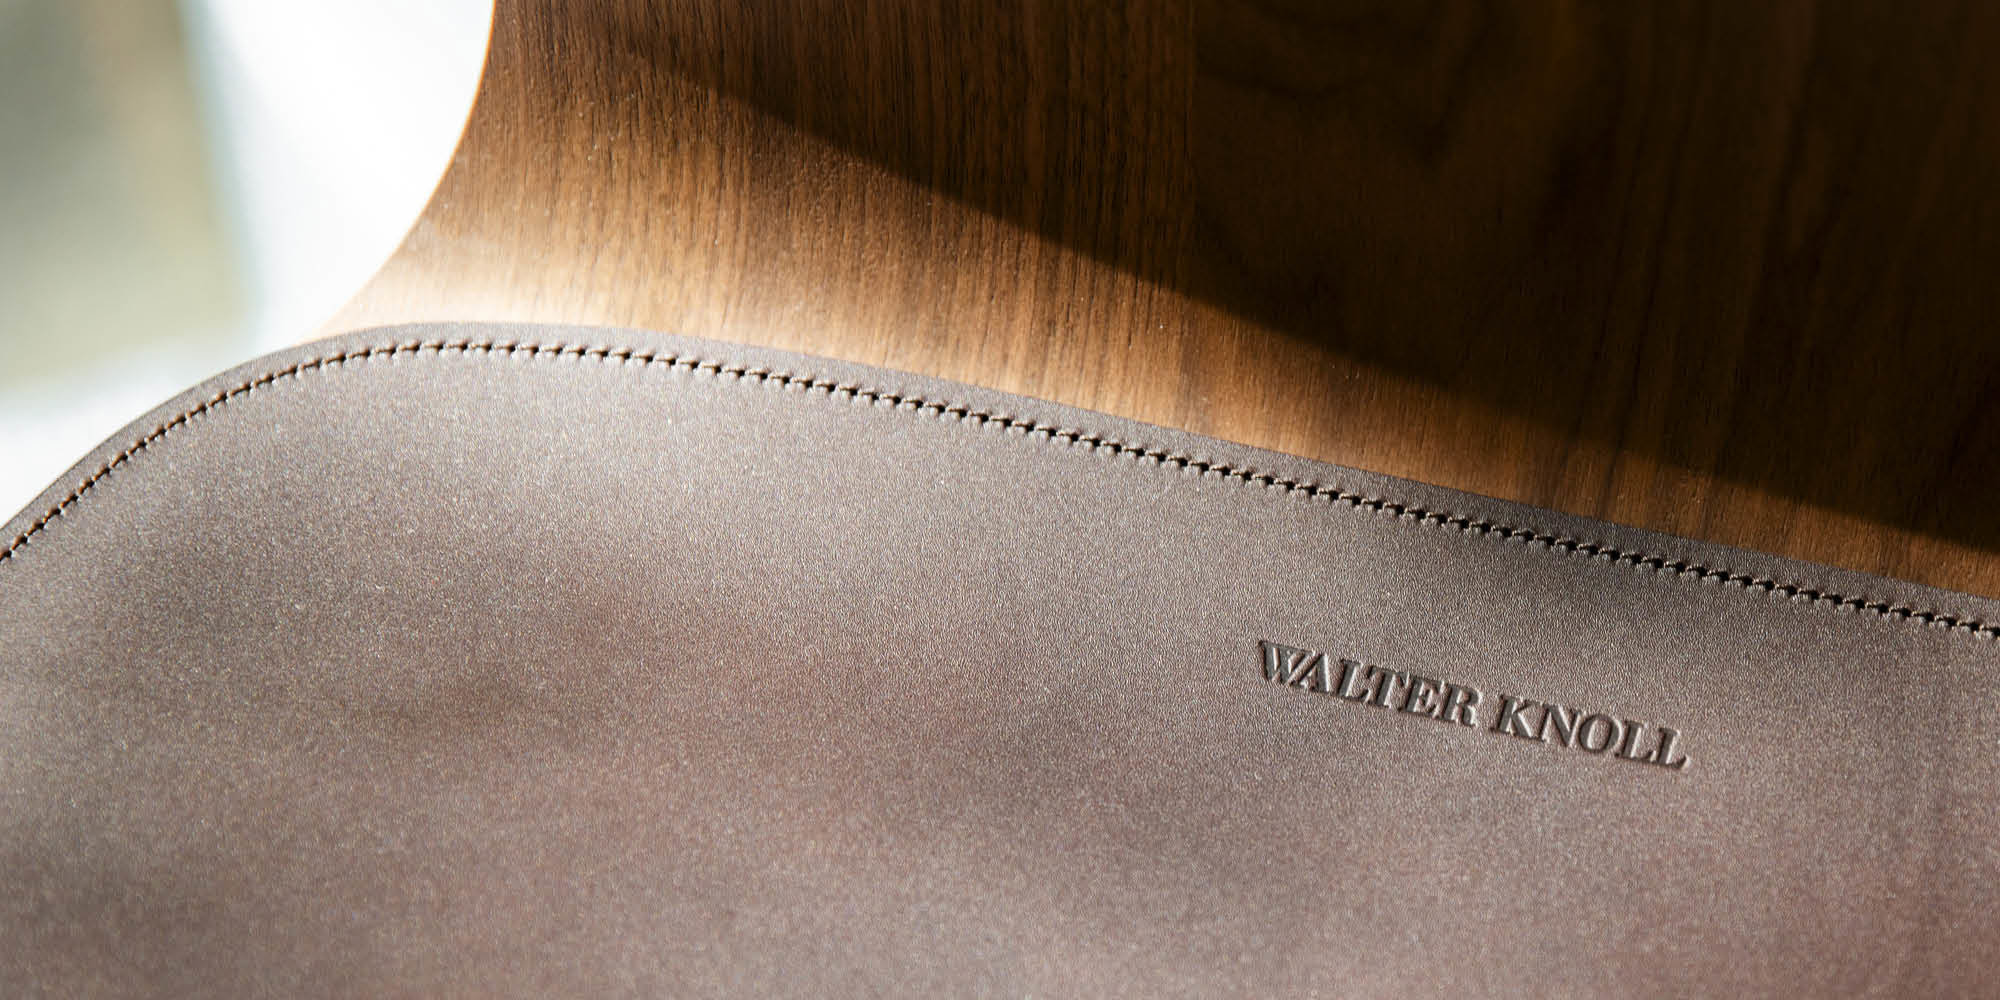 Foster + Partners Industrial Design Launches New Chair With Walter Knoll